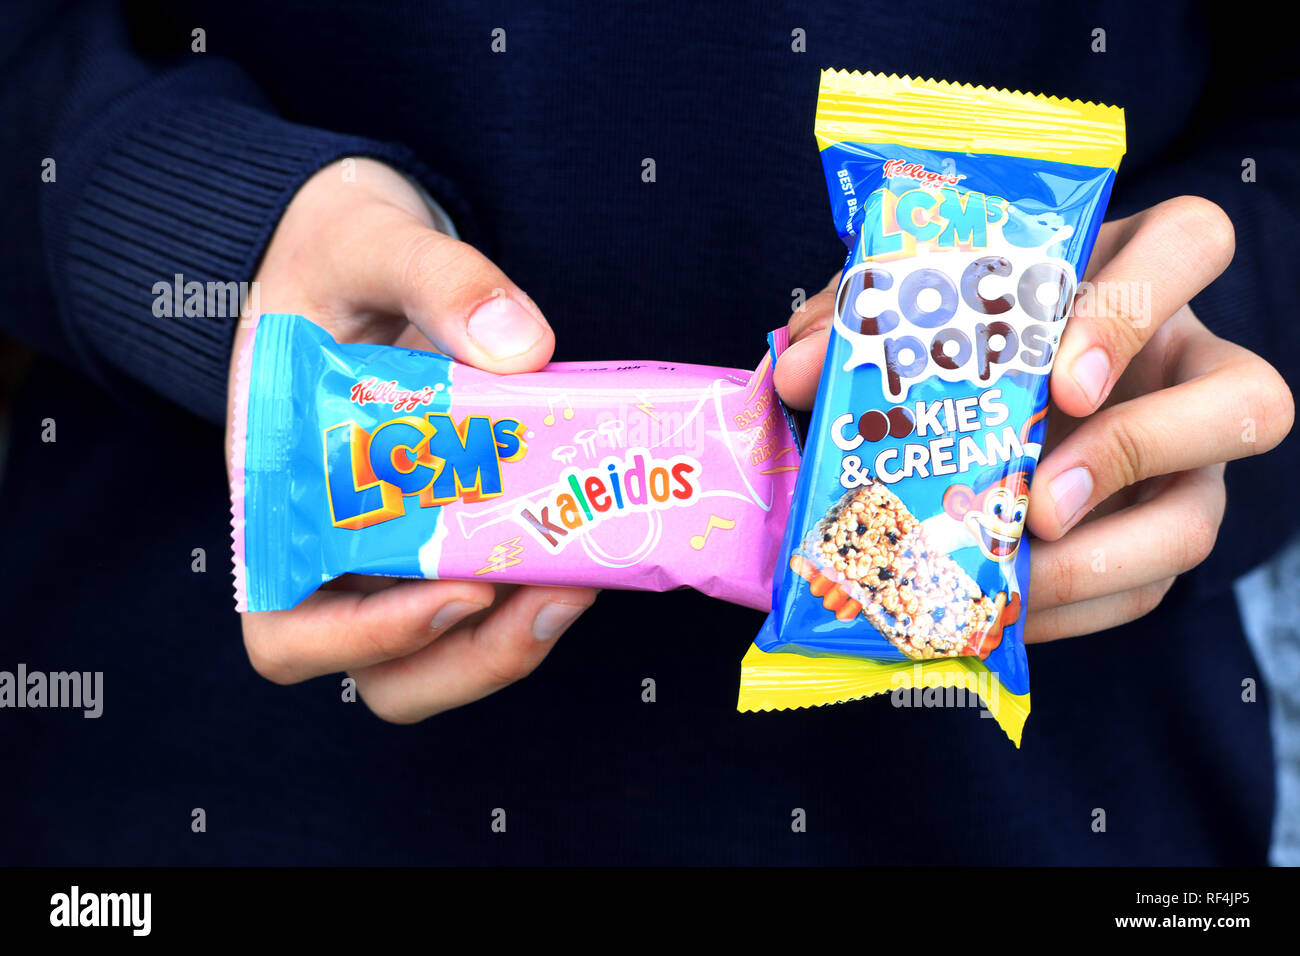 LCM's Kaleidos and Coco pops Cookies and Cream isolated against black background Stock Photo